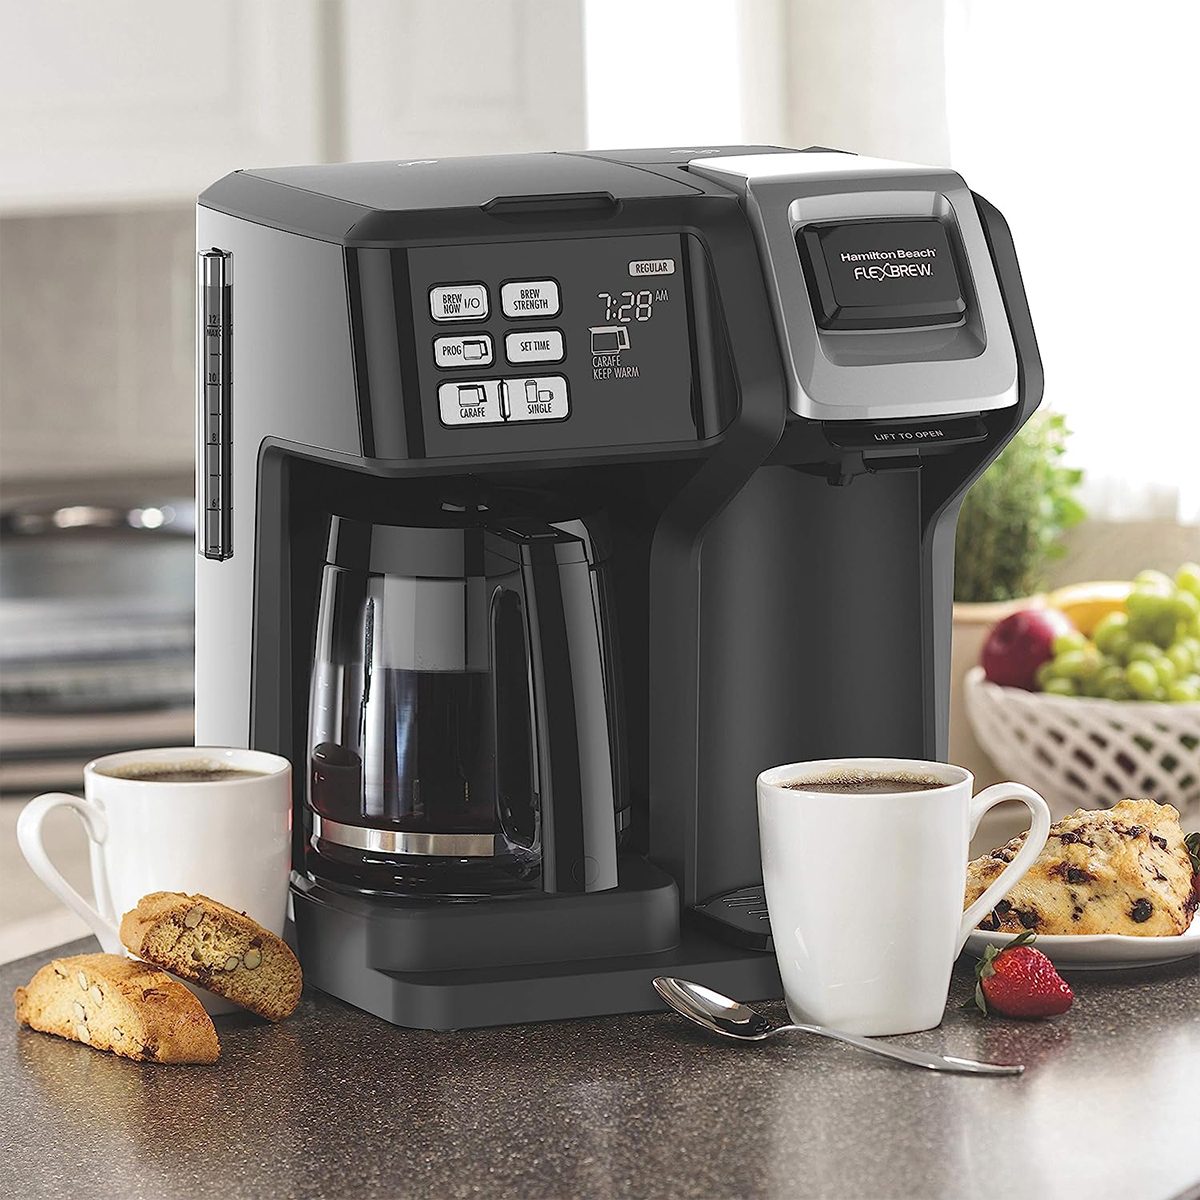 https://www.tasteofhome.com/wp-content/uploads/2022/11/These-Coffee-Maker-Deals-Are-Grounds-for-Celebration_1FT_via-amazon.com_.jpg?fit=700%2C1024